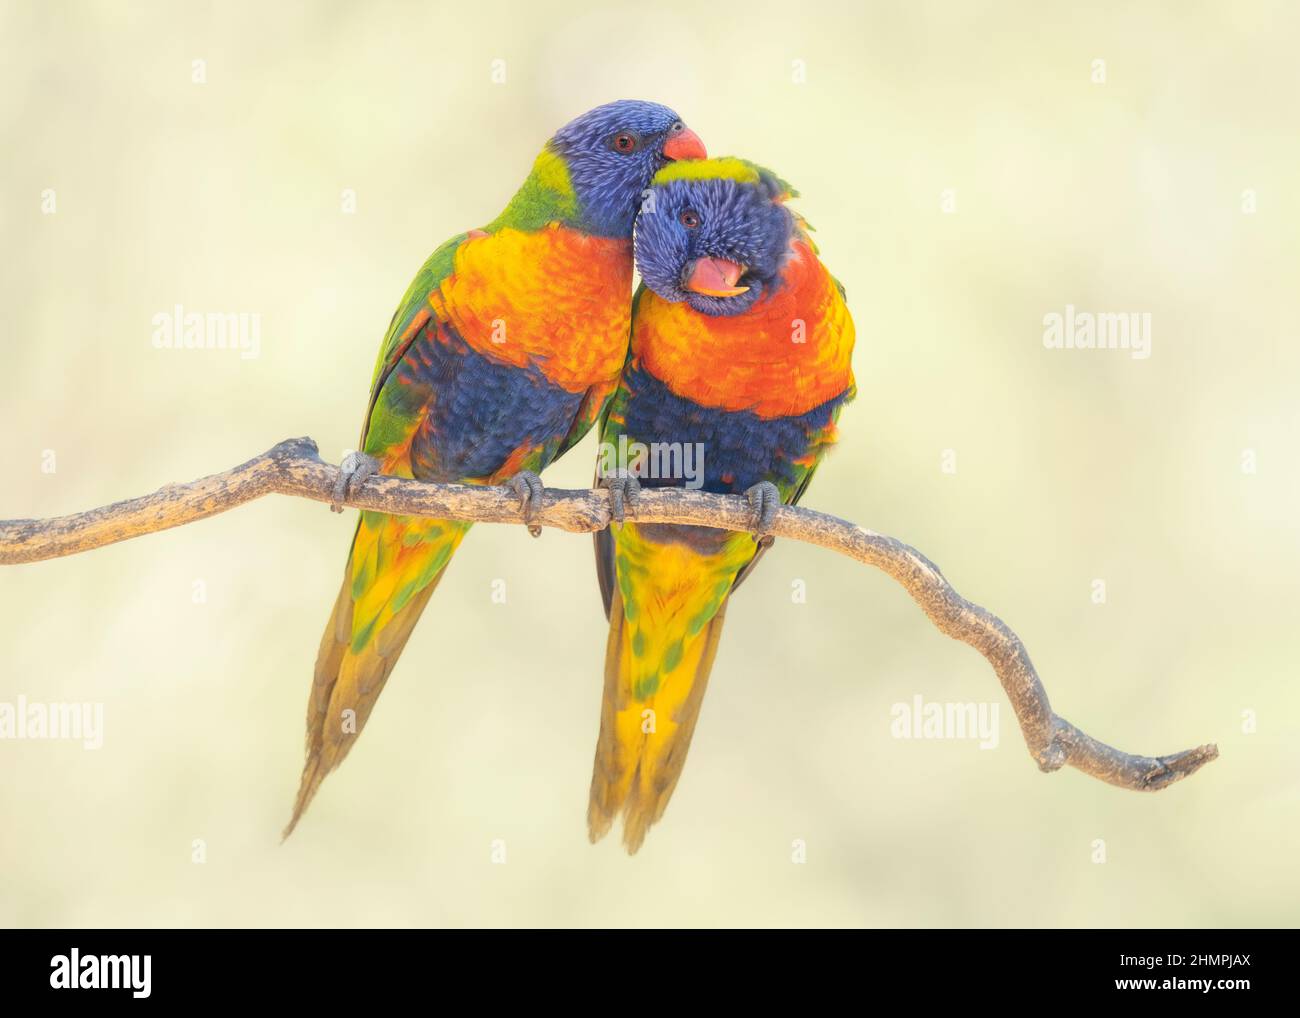 A pair of rainbow lorikeets sitting on a branch grooming each other, Australia Stock Photo